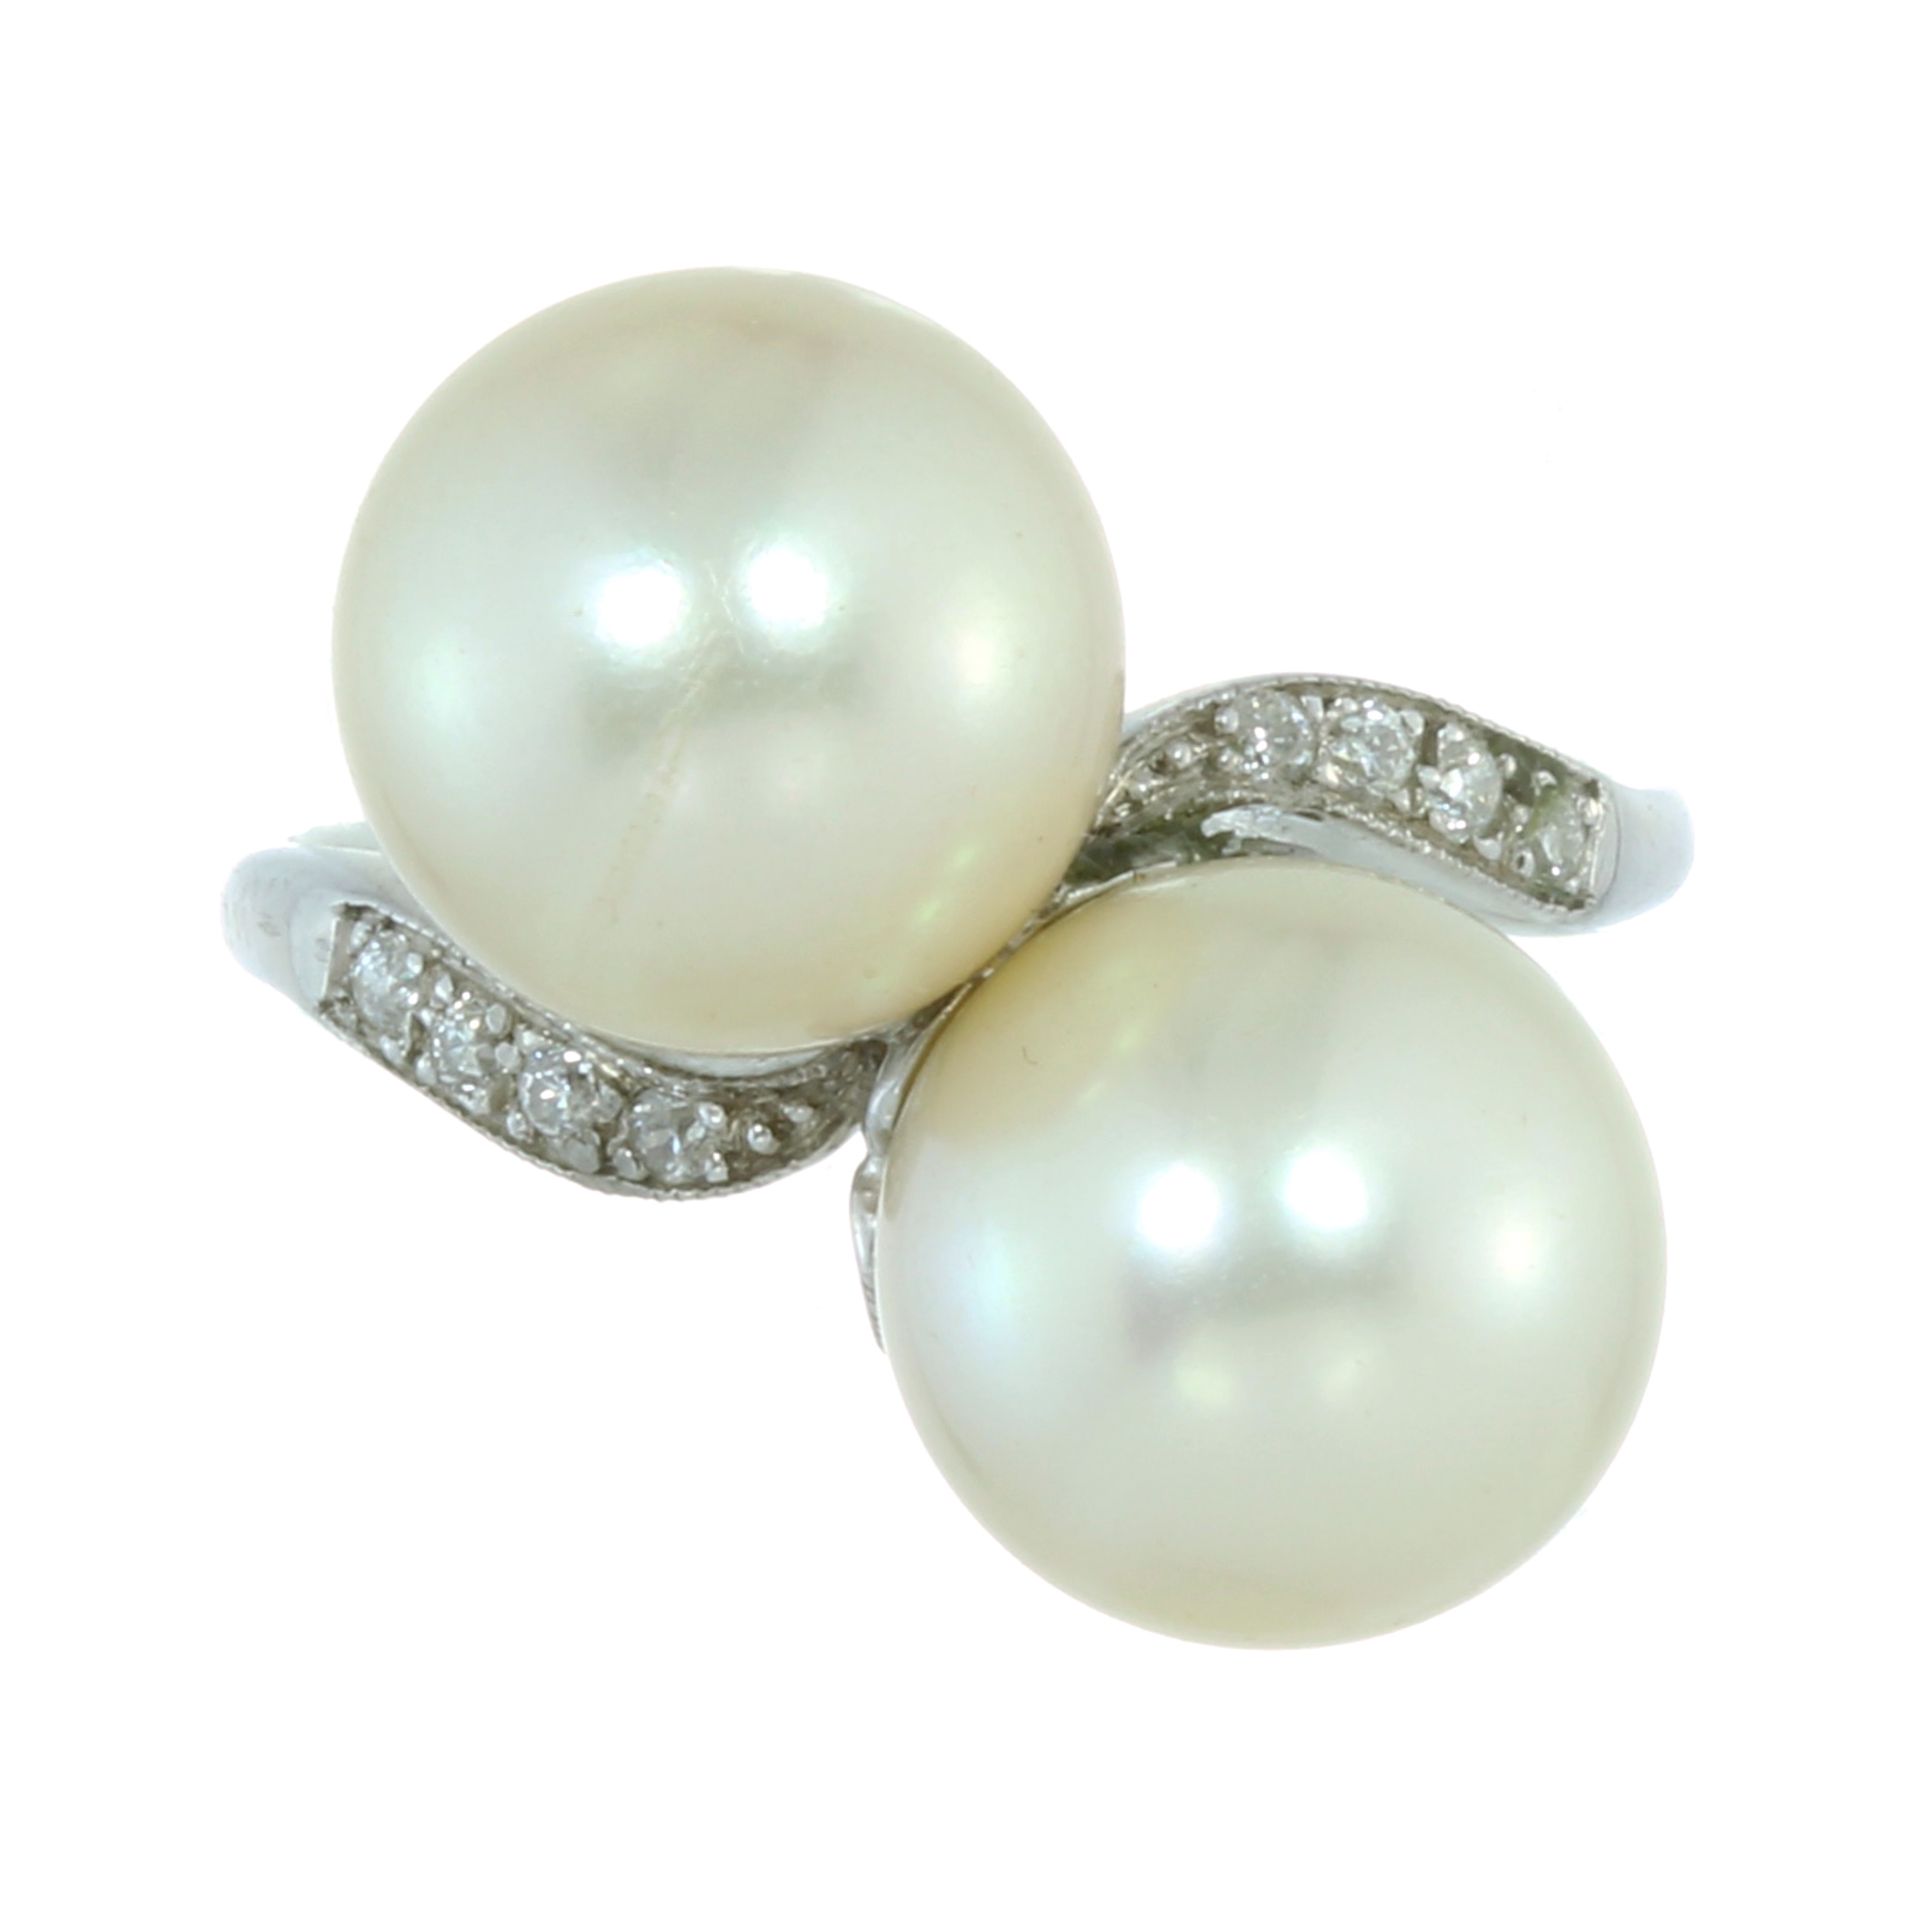 AN ANTIQUE PEARL AND DIAMOND TOI ET MOI RING in white gold or platinum set with two large pearls